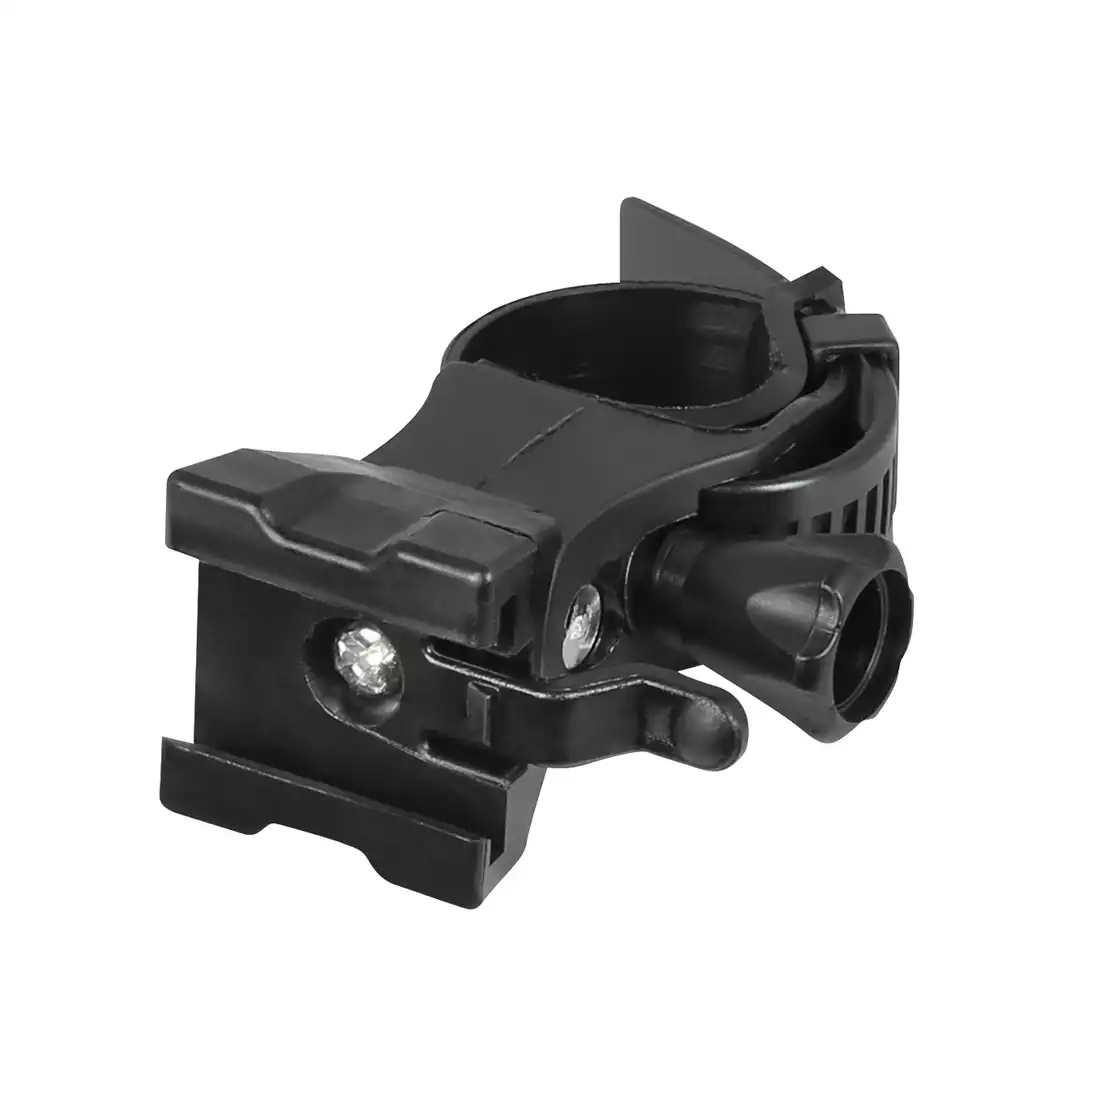 FORCE OPTIC Bicycle rear lamp holder for the seatpost, black